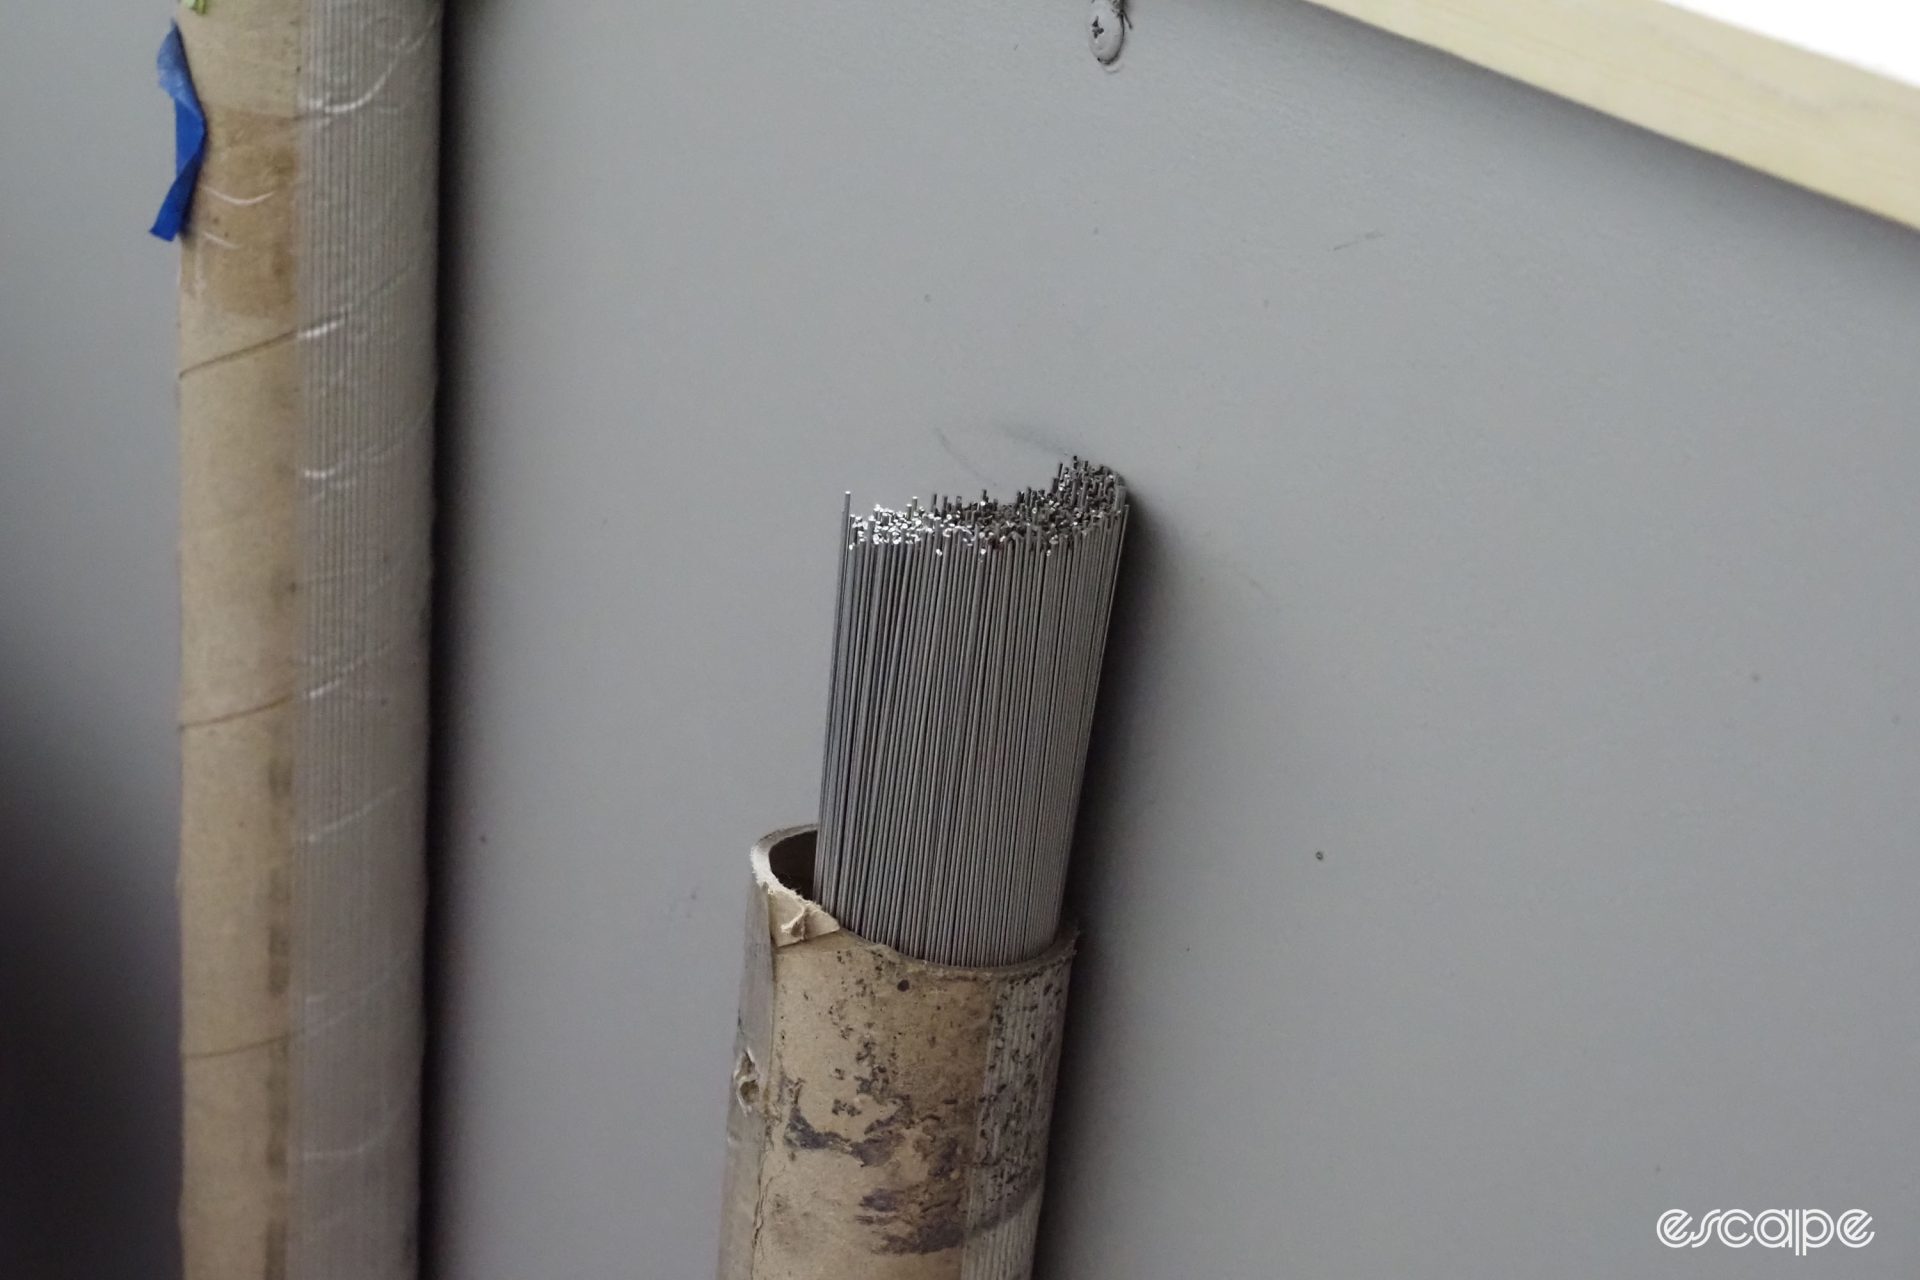 A small neat stack of titanium welding rods in a workstation.